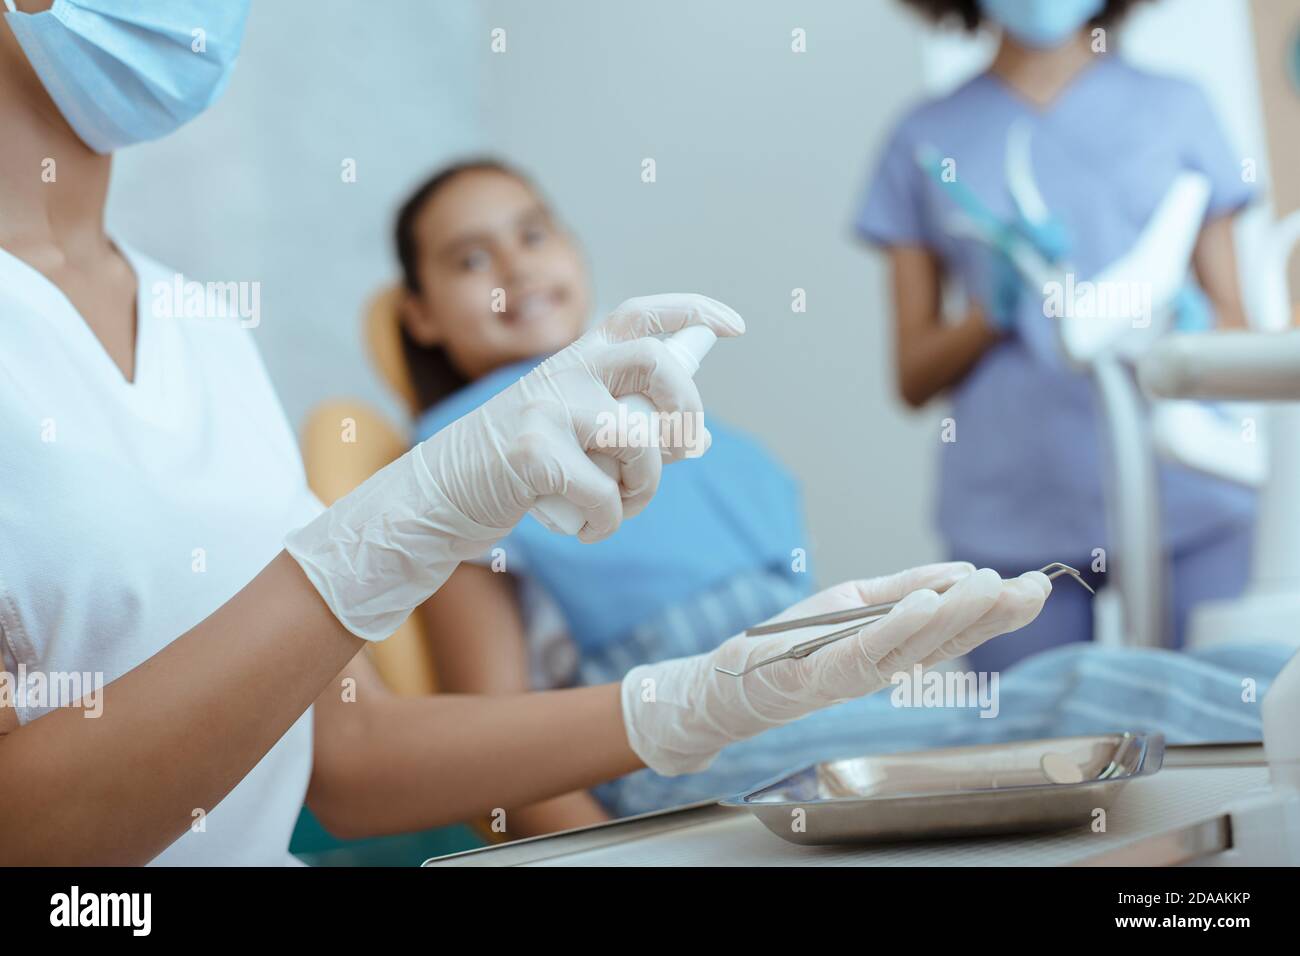 Millennial woman doctor in rubber gloves and protective mask processes dental instruments Stock Photo